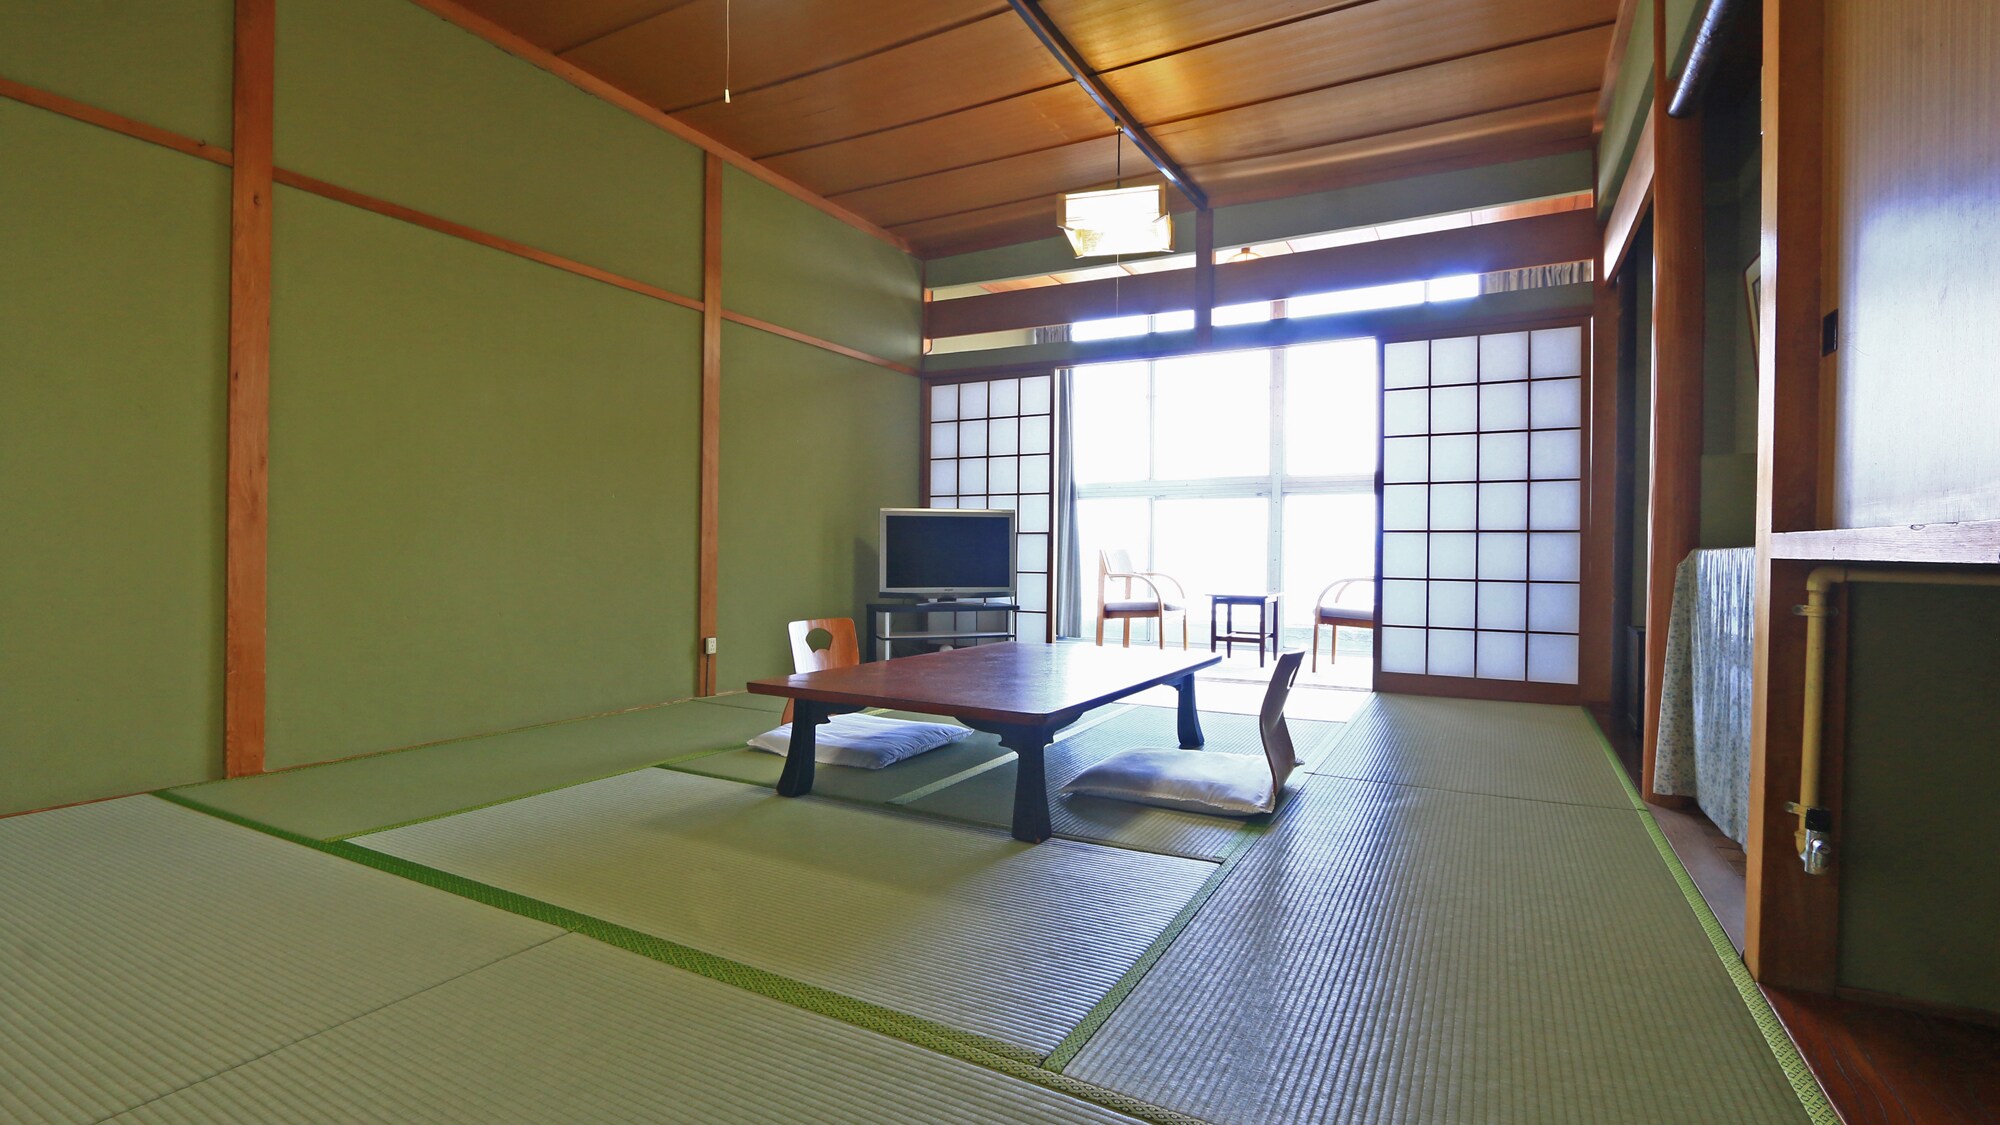 [Annex] A Japanese-style room with 10 tatami mats, so you can spend a relaxing time.